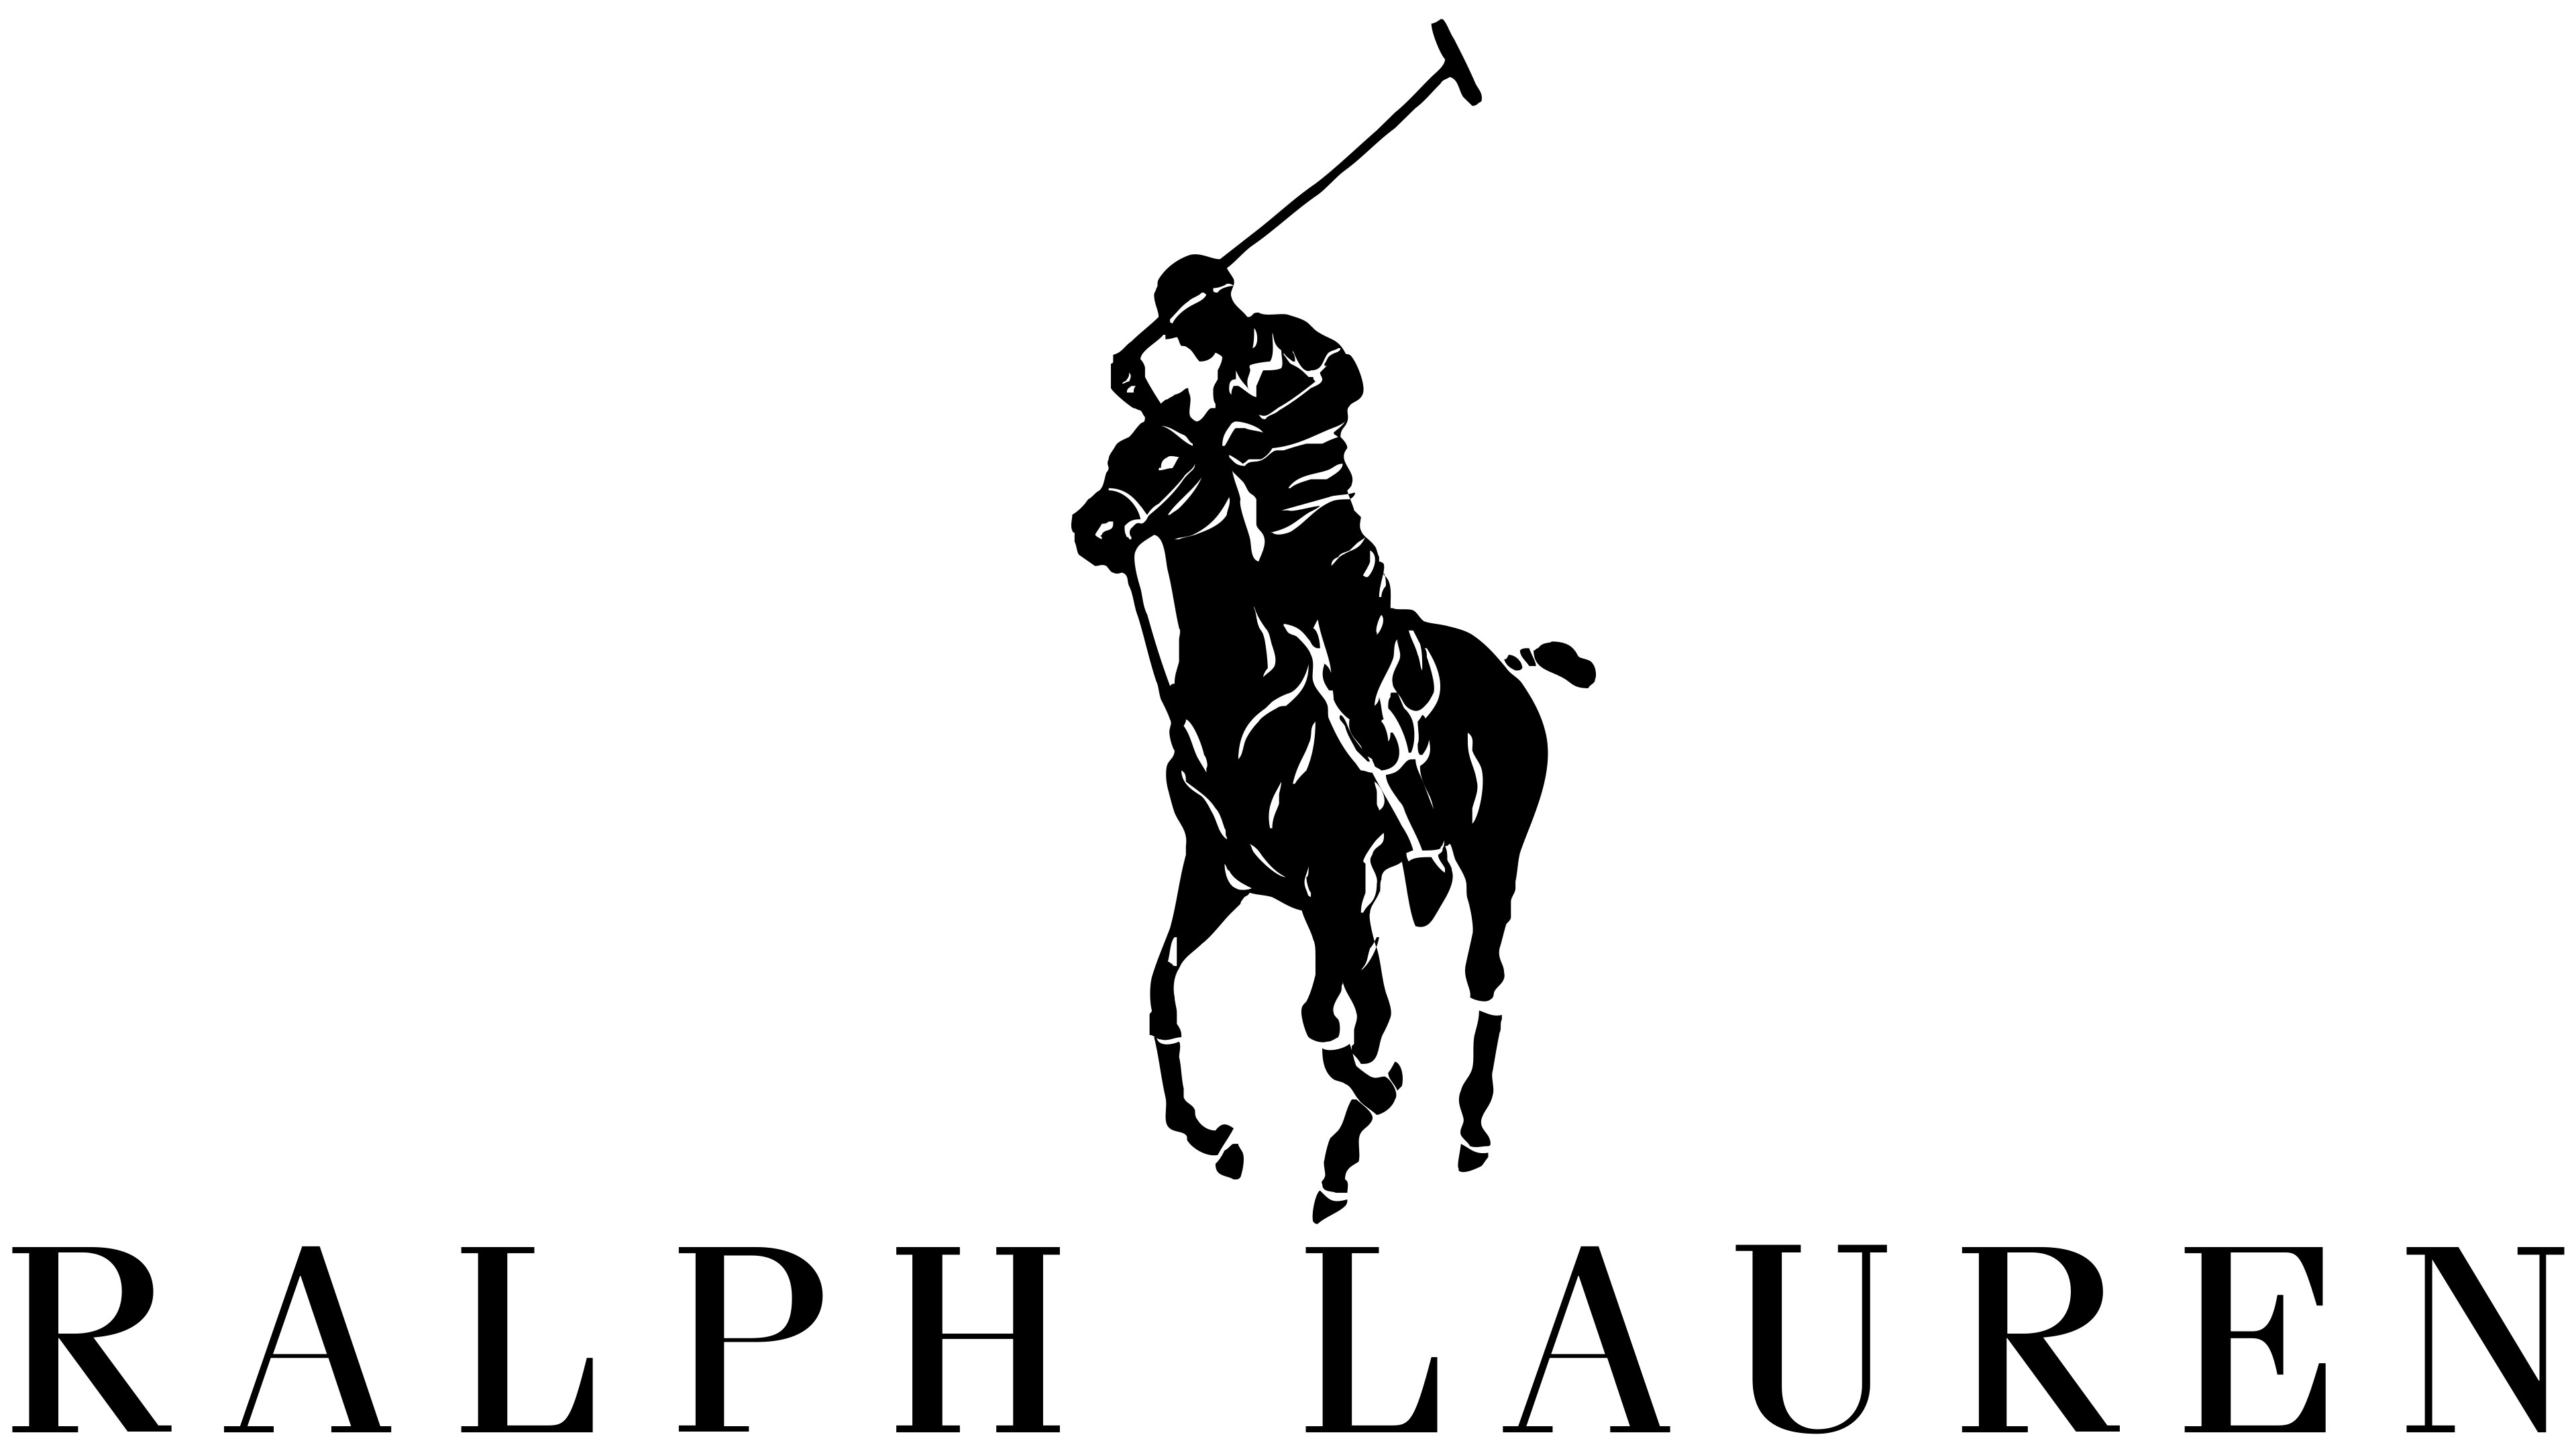 Polo Logo Png Ralph Lauren Logo The Most Famous Brands And Company Logos In 3840x2160 